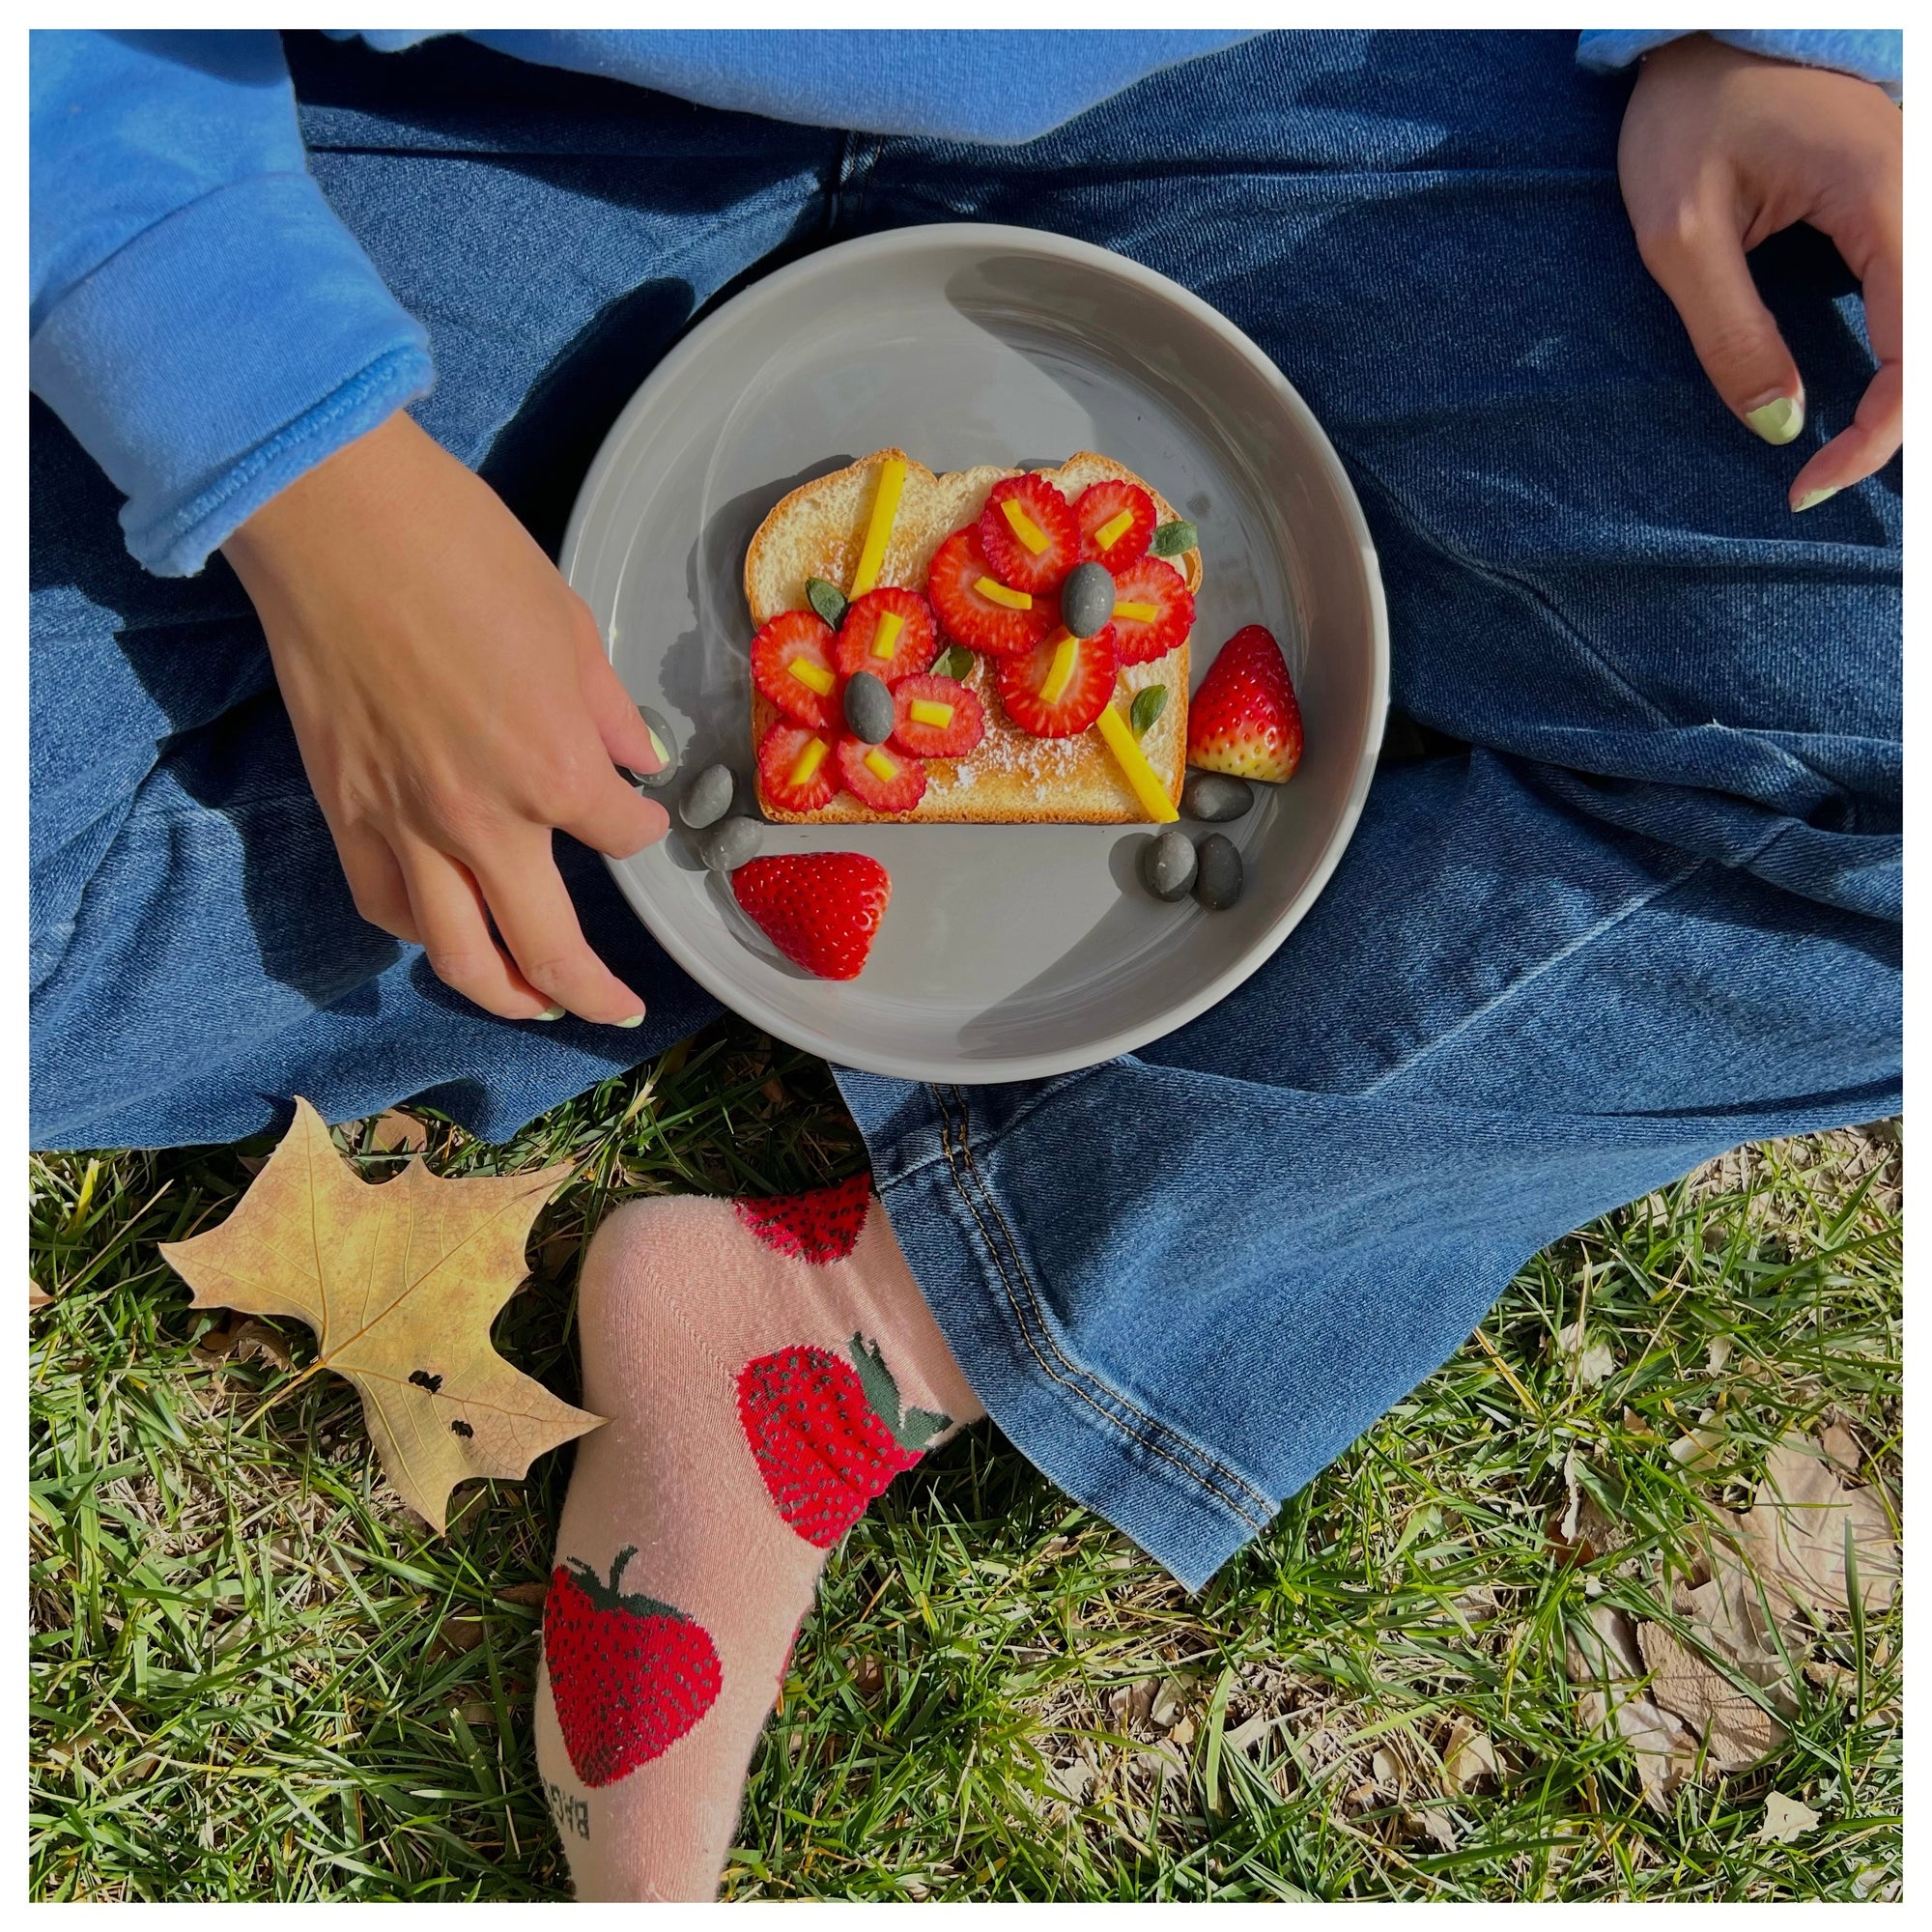 Person sitting on grass with a plate of fruit-topped toast, wearing jeans and strawberry socks